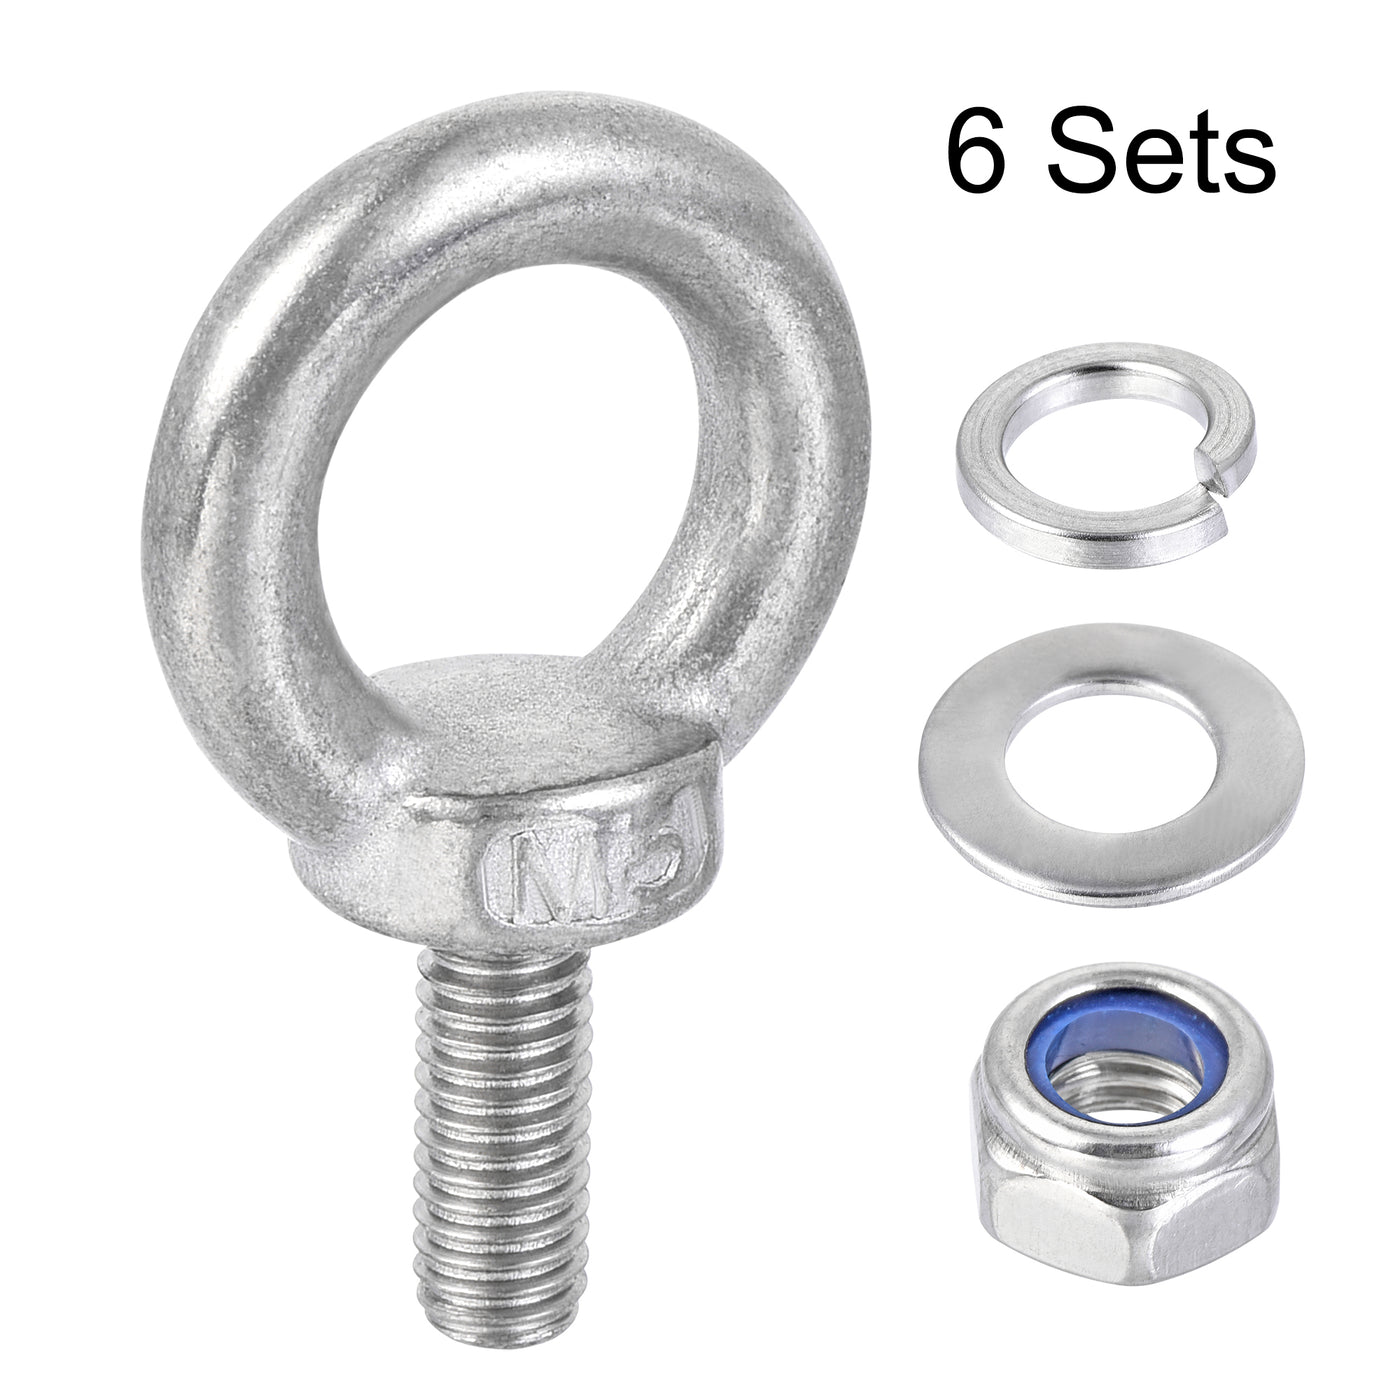 uxcell Uxcell Lifting Eye Bolt M5 x 12.5mm Male Thread with Hex Screw Nut Gasket Flat Washer for Hanging, 304 Stainless Steel, 6 Sets